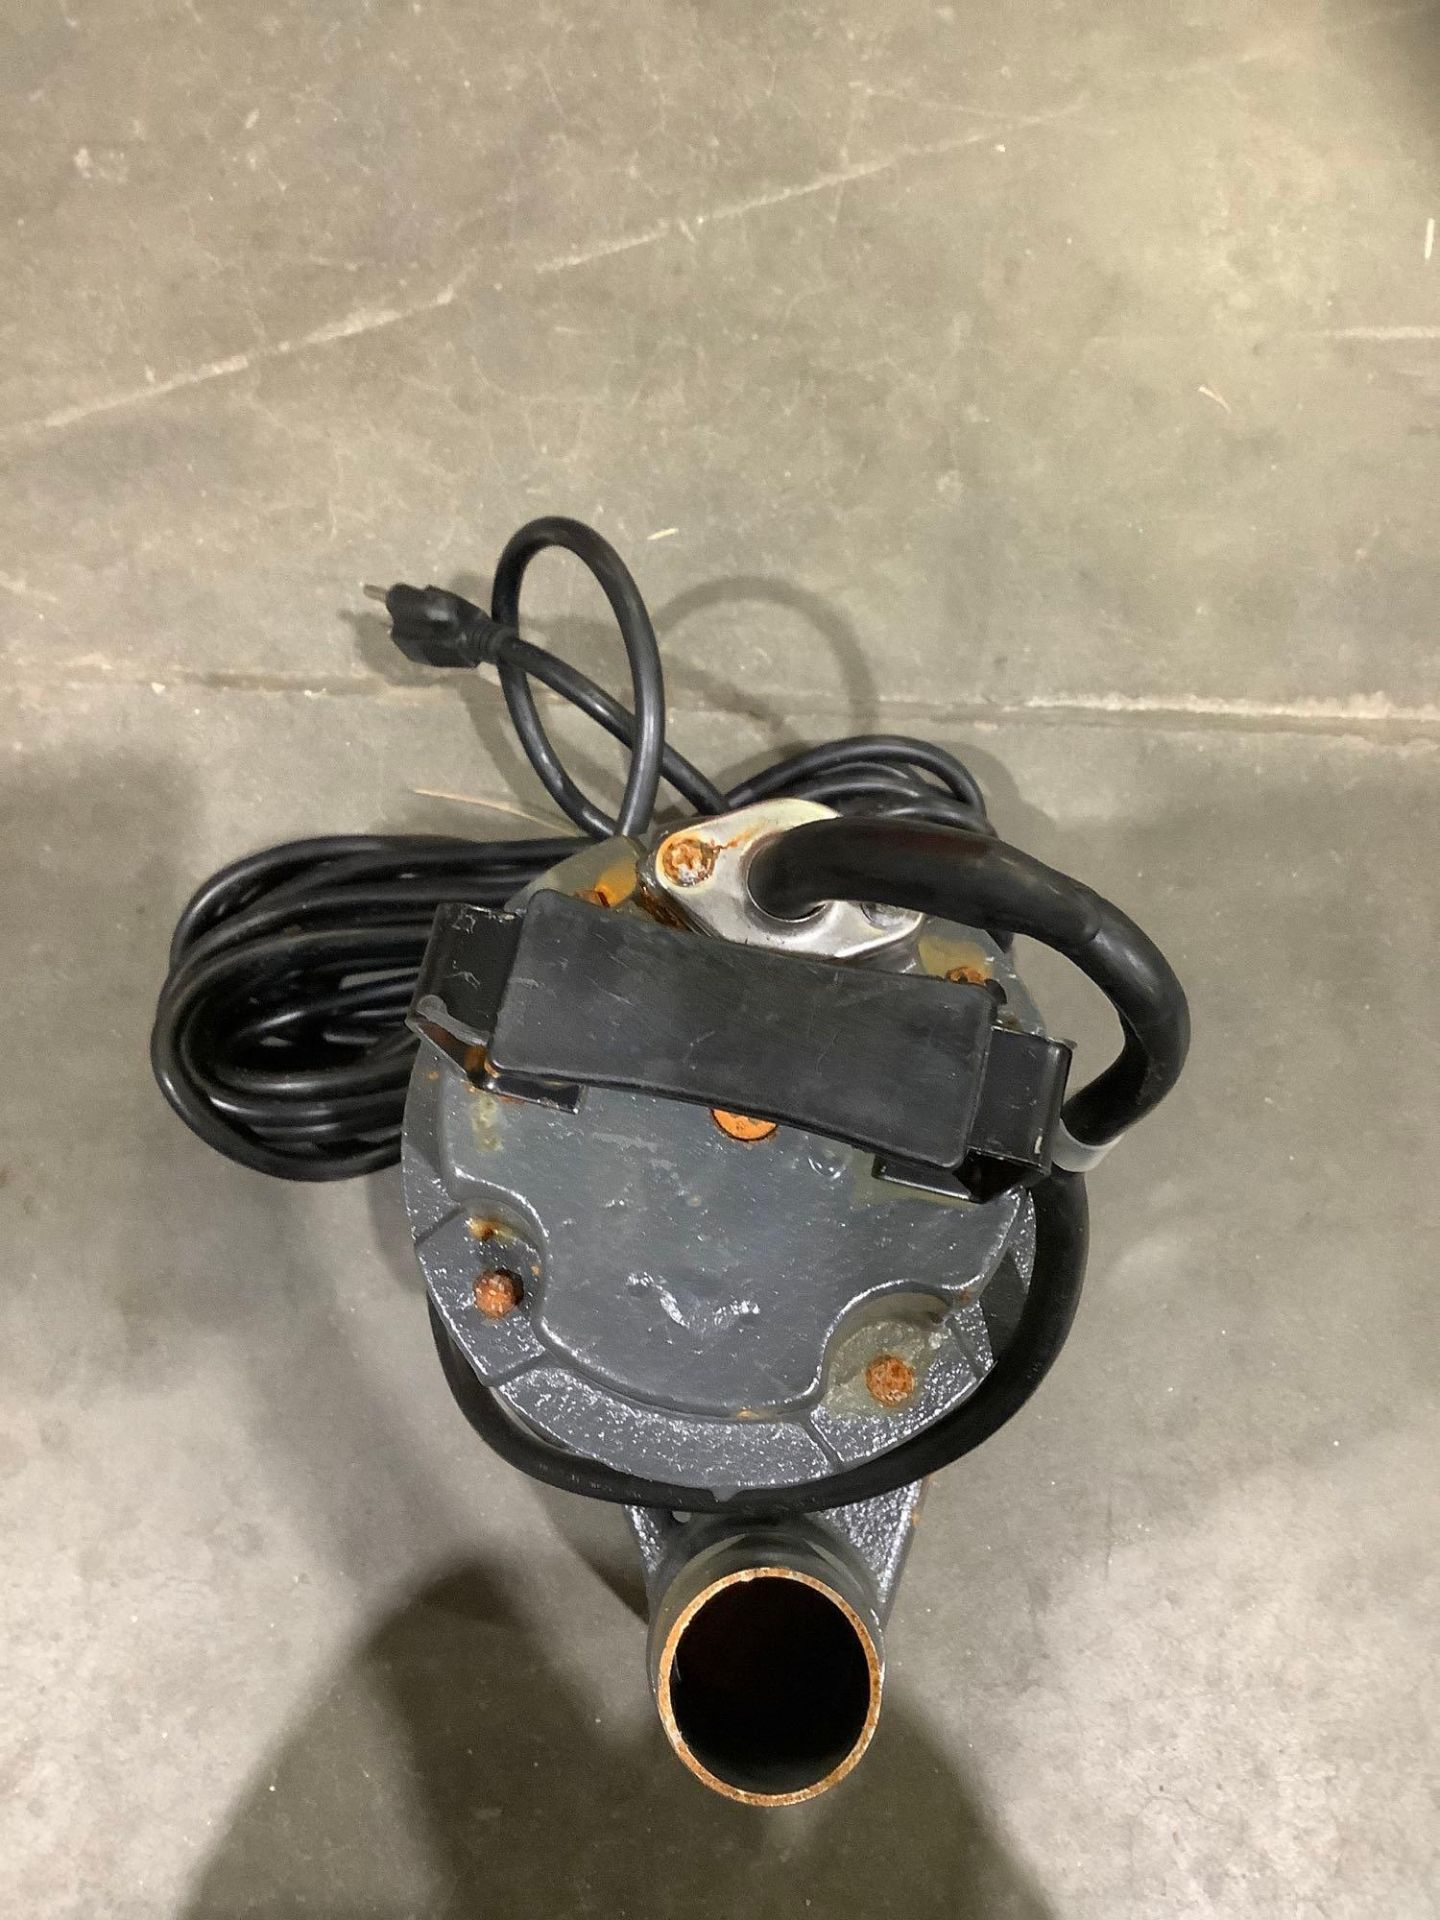 UNUSED SUBMERSIBLE MUSTANG MP4800 PUMP - Image 5 of 6